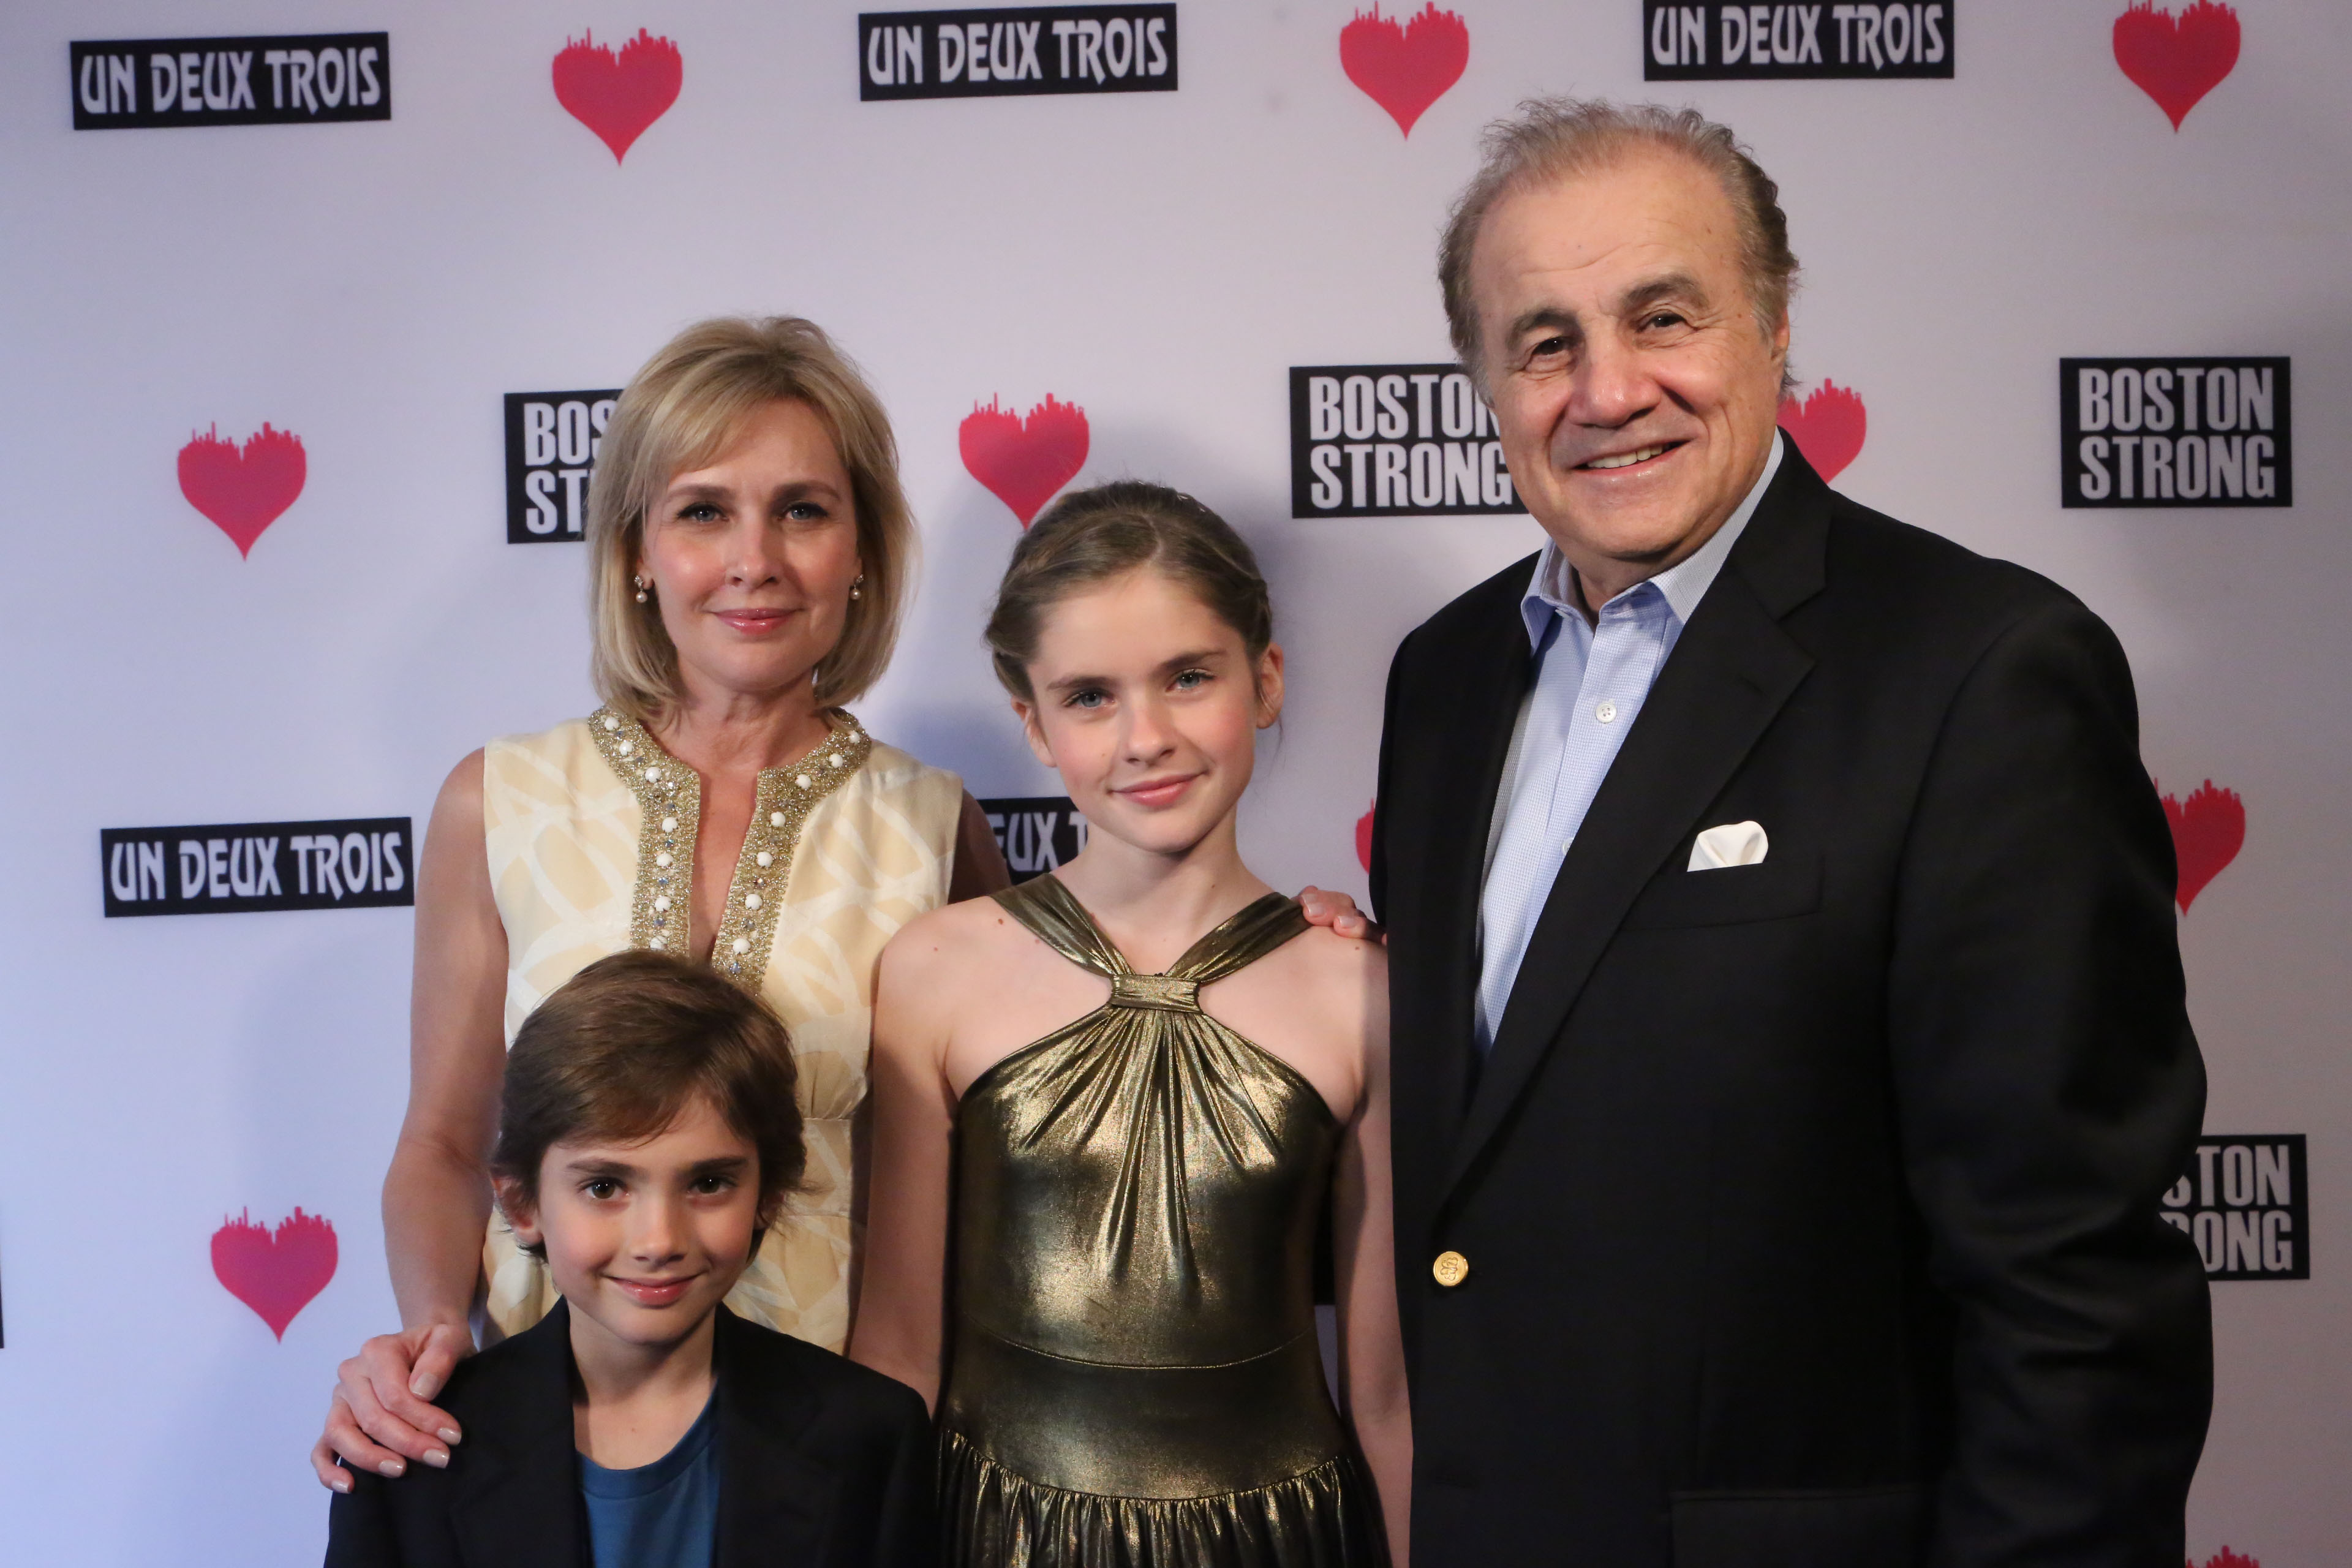 Thompson Family, Trevor, Kelly, Taylor Ann, and Larry - Un Deux Trois - Boston Charity Event - May 15, 2013